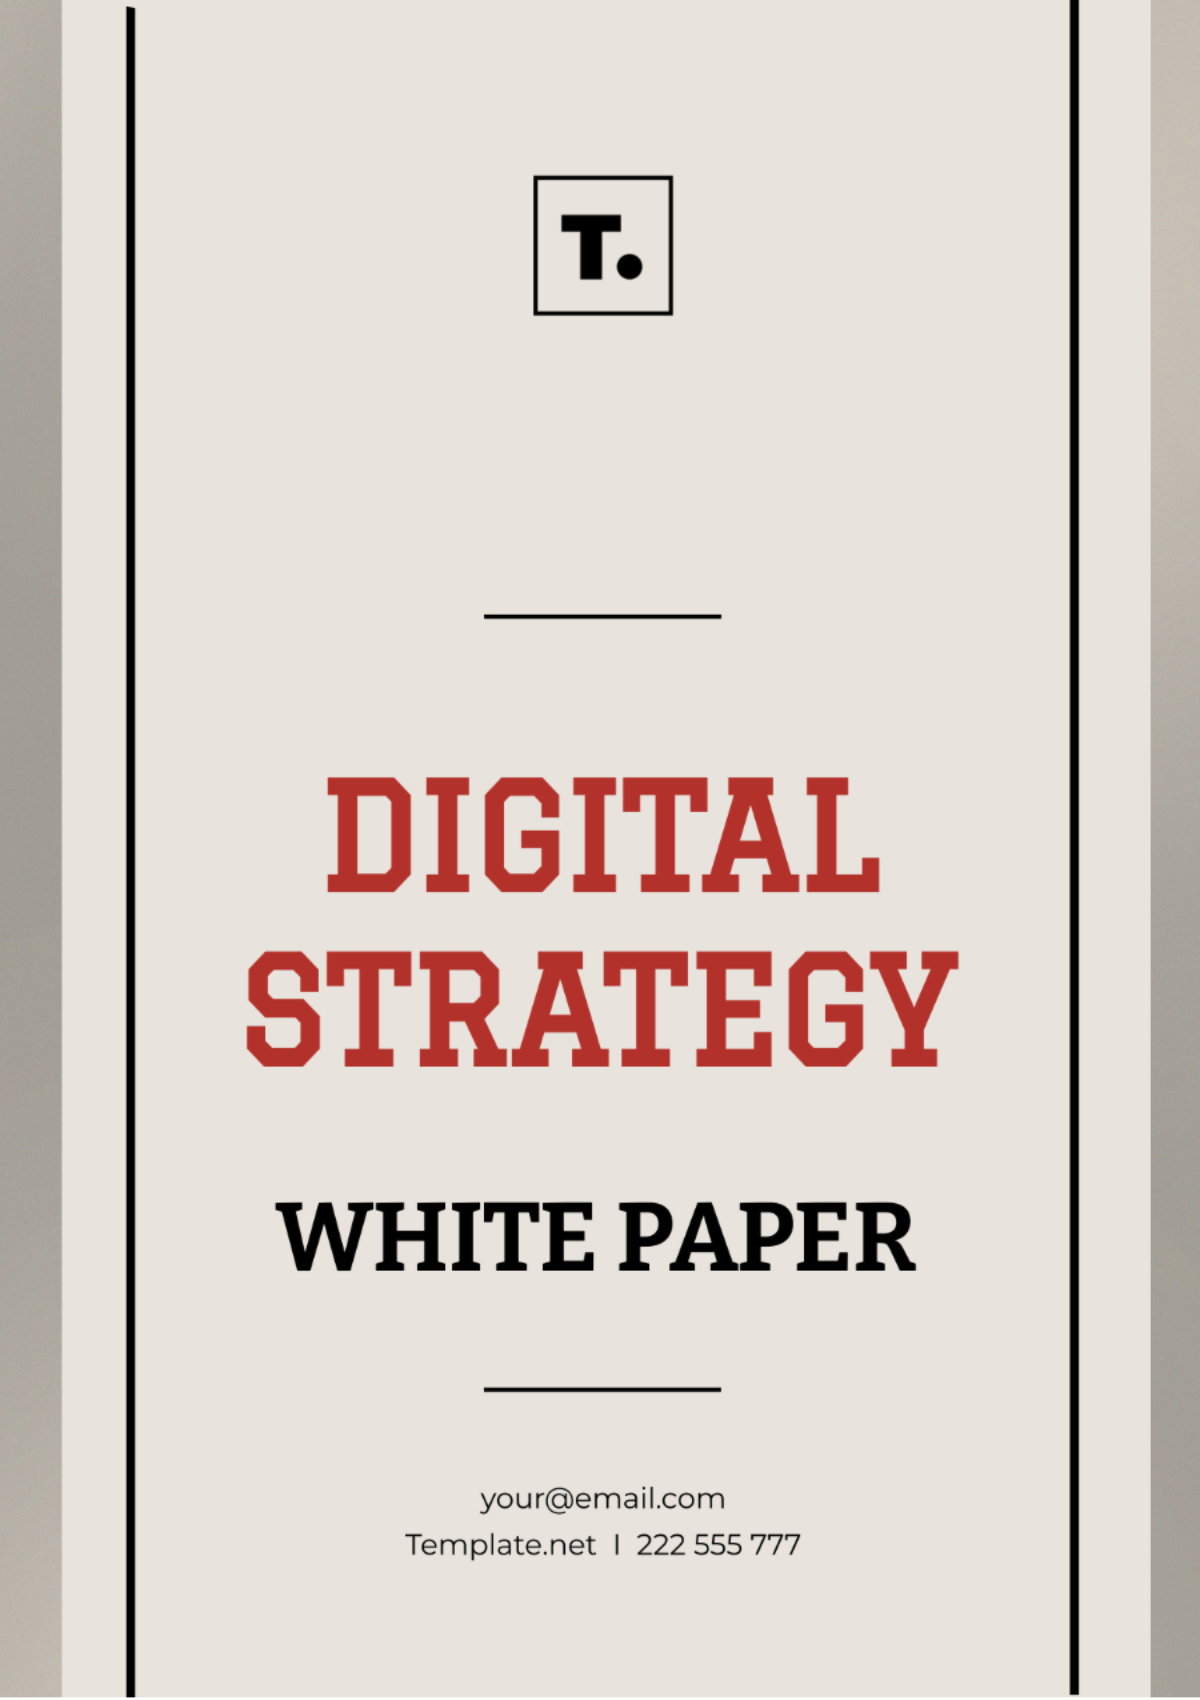 Digital Strategy White Paper Template